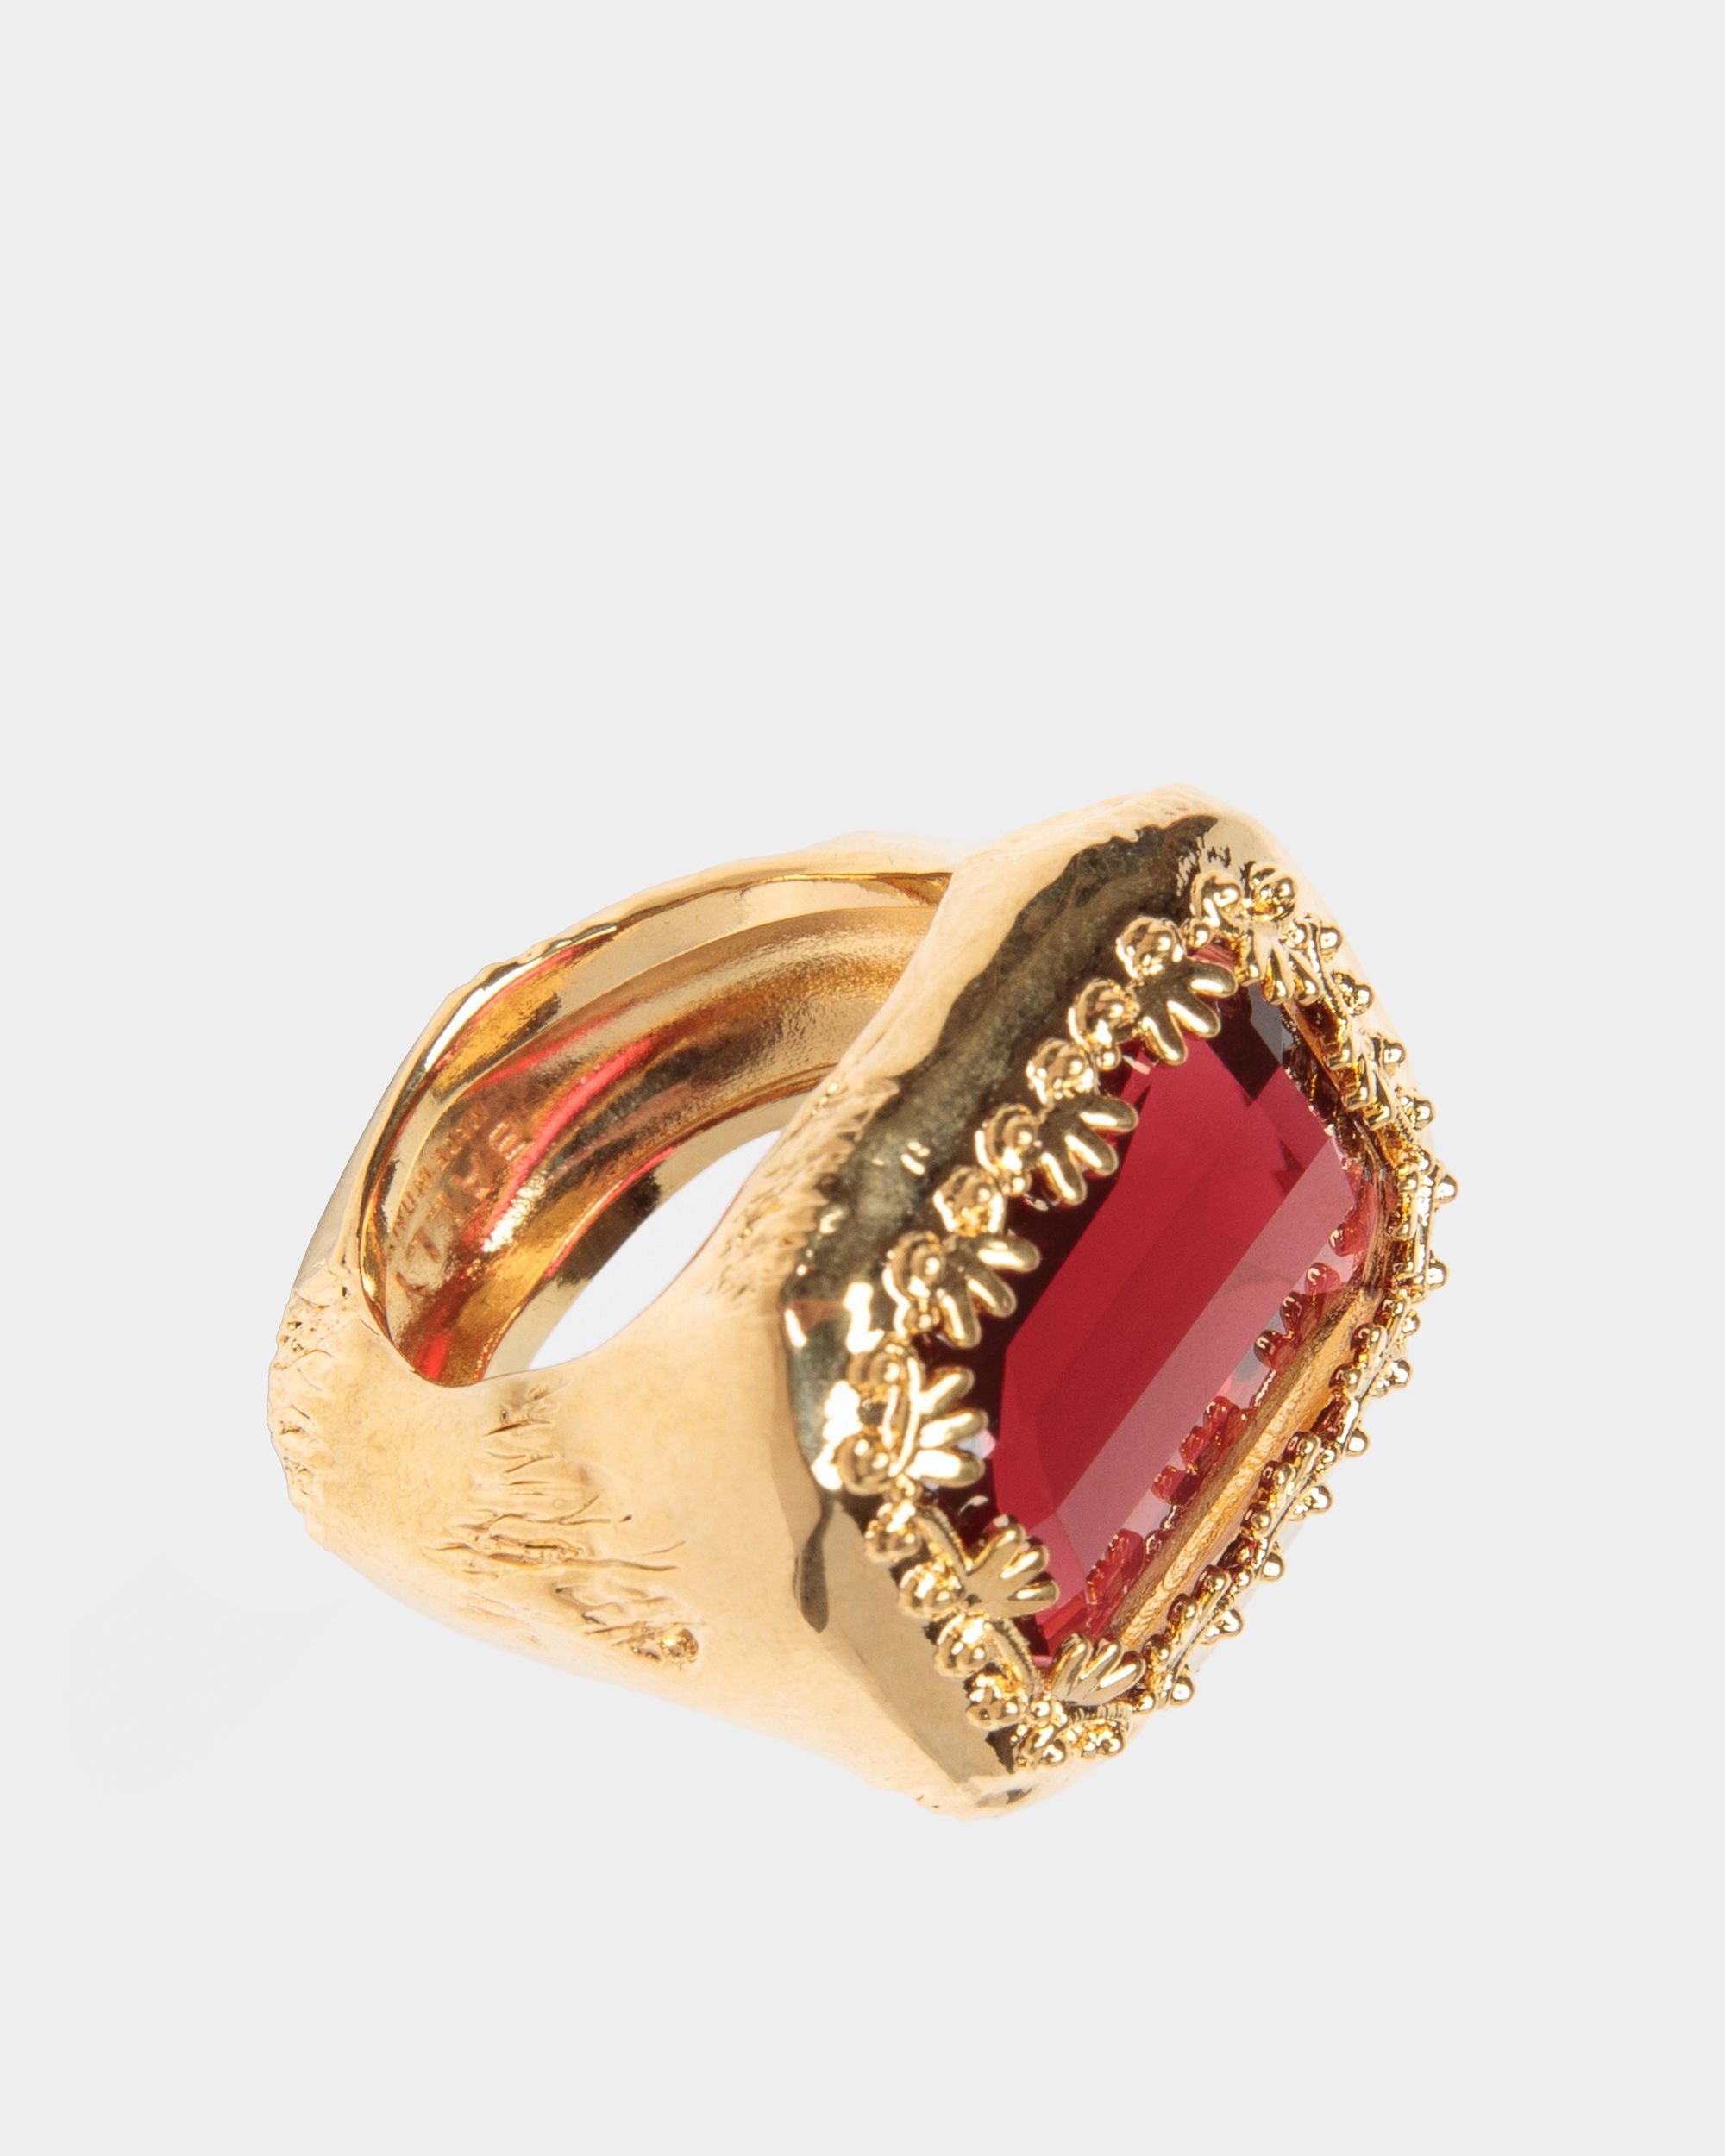 Baroque Ring | Women's Ring | Hammered Gold | Bally | Still Life Front